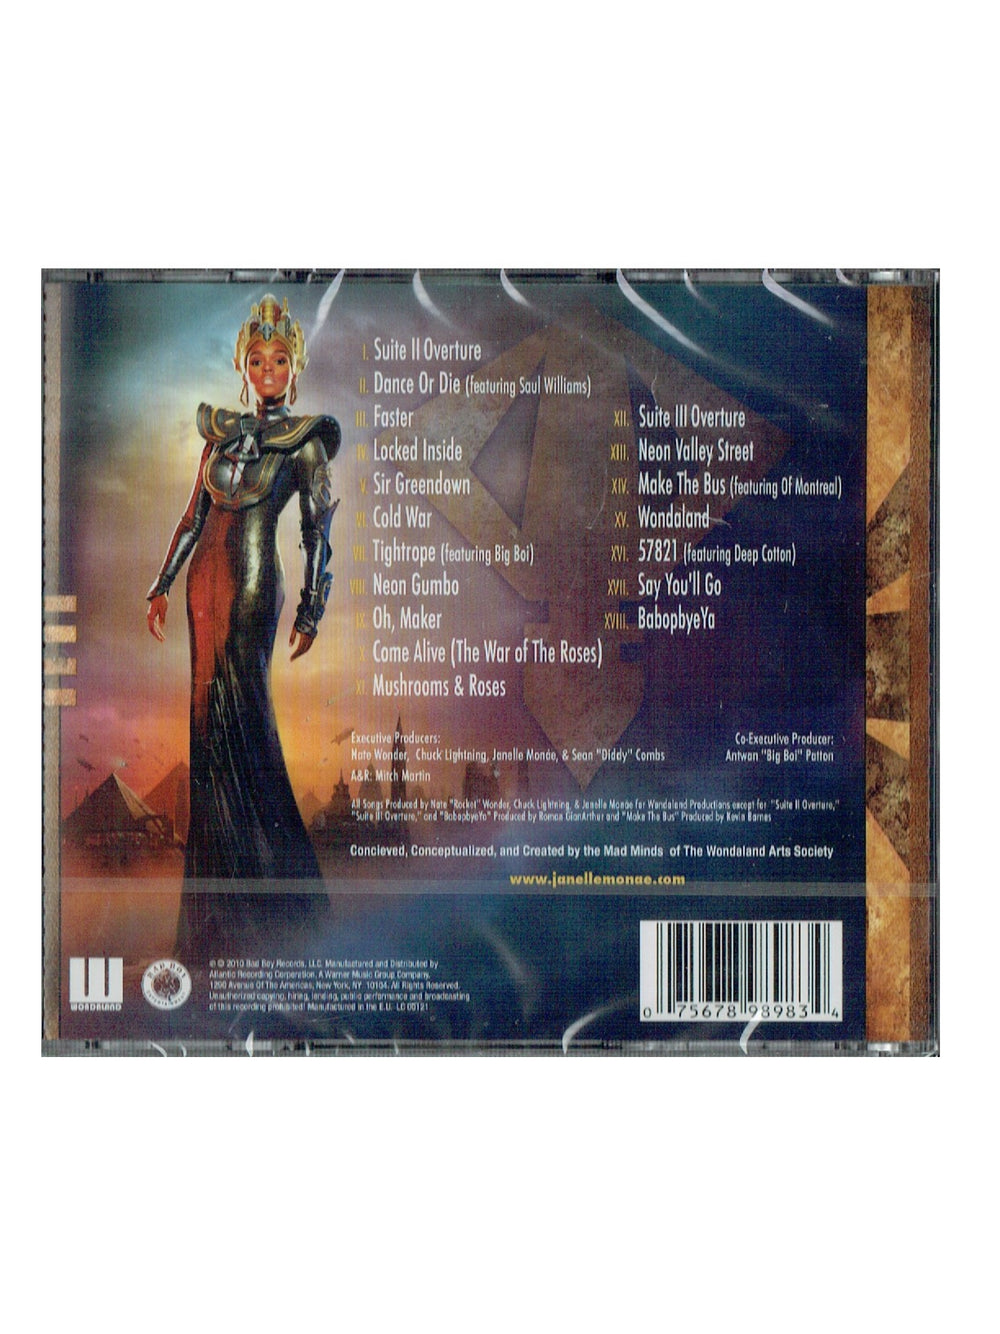 Prince – Janelle Monae The Arch Android CD Album EU NEW: 2010